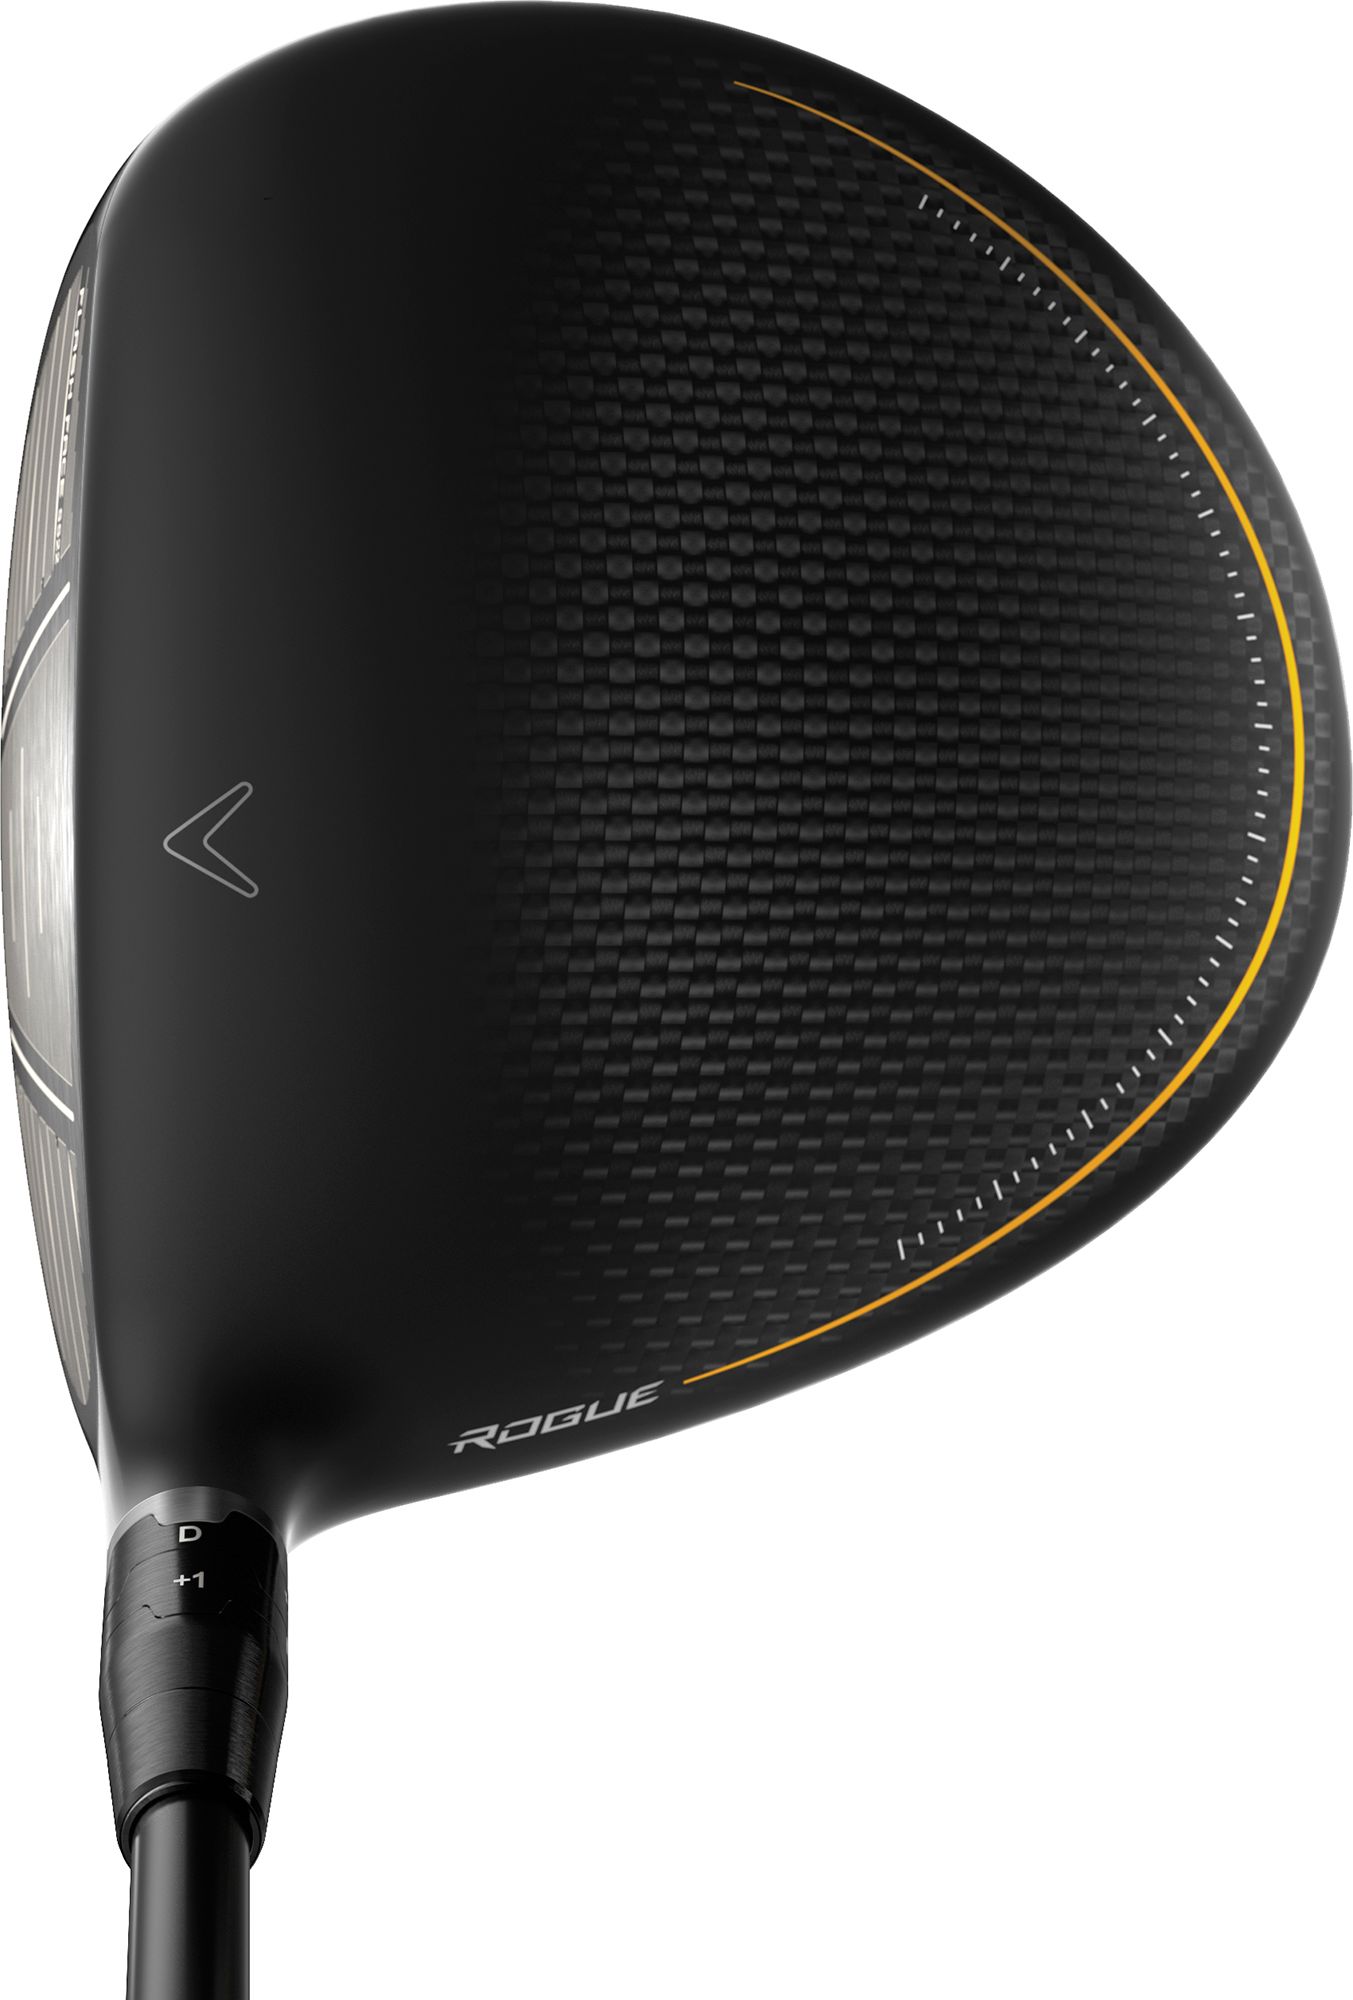 Callaway Rogue ST MAX Driver - Up to $100 Off | Golf Galaxy